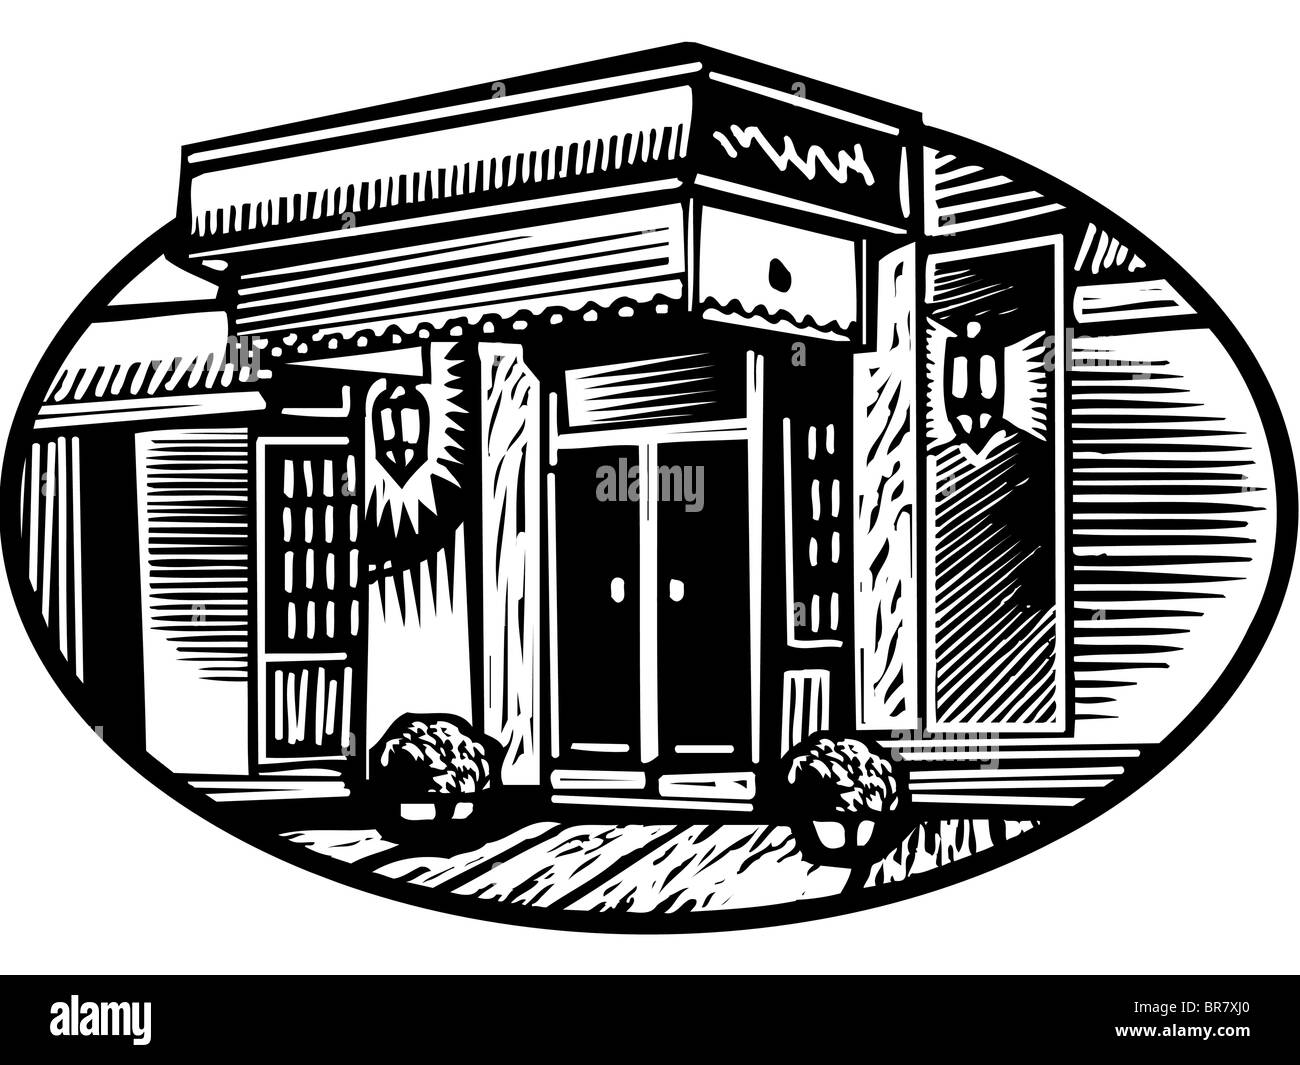 Oval illustration of a hotel entrance, black and white Stock Photo